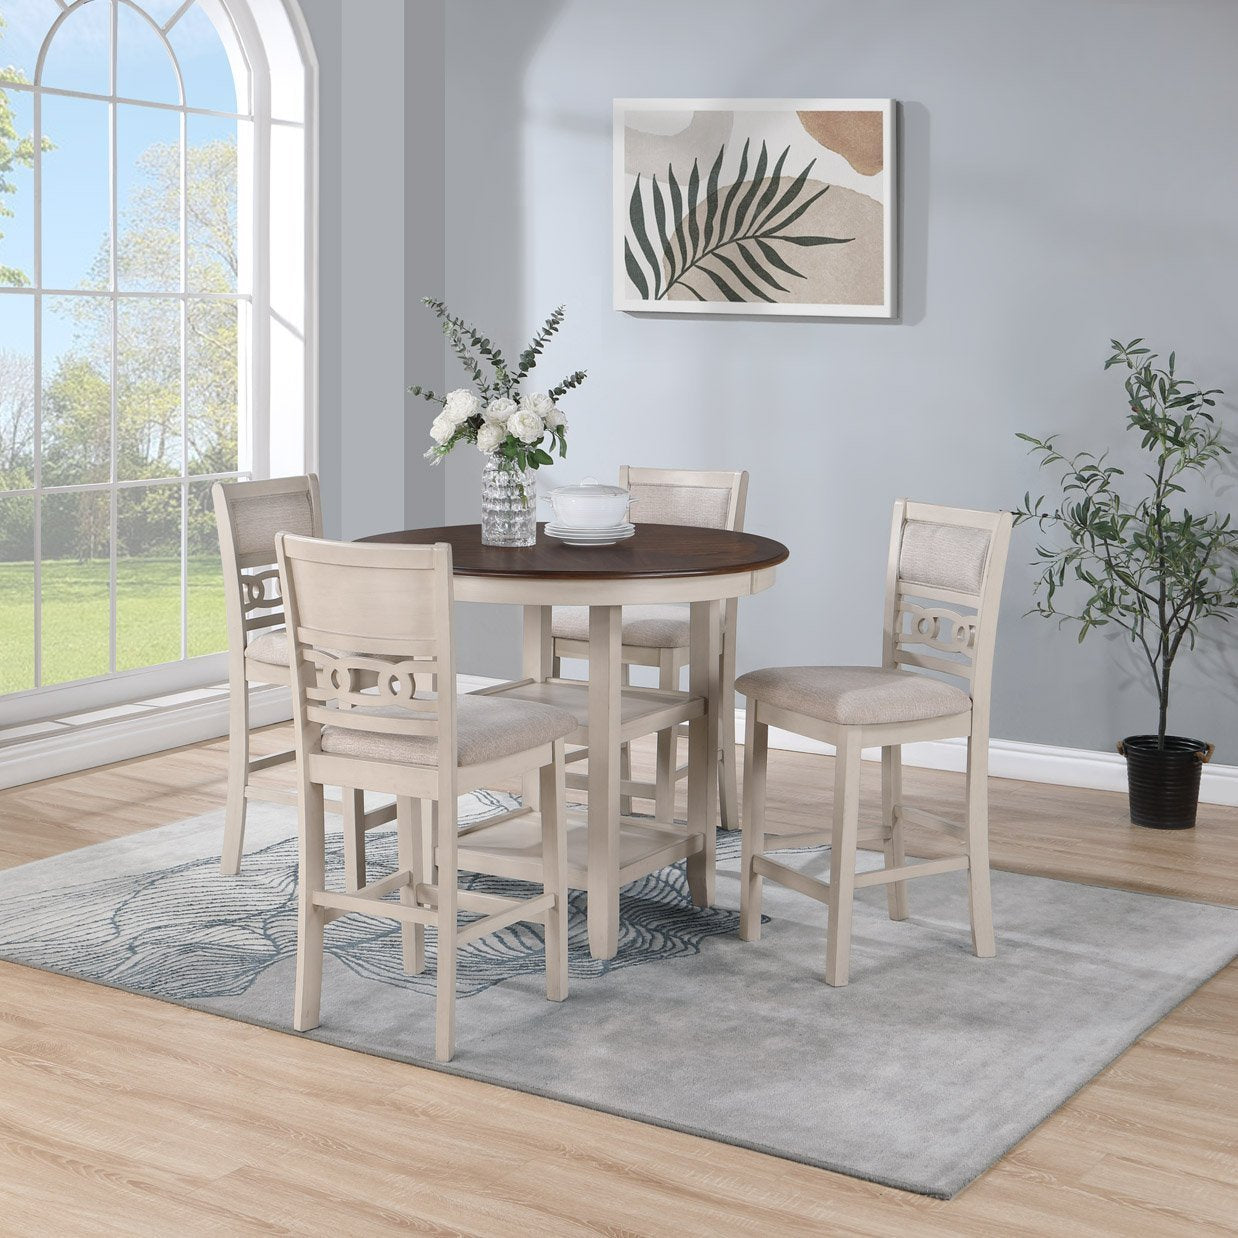 5-piece-Counter-Height-Dining-Set,-Antique-White-Two-tone-Kitchen-&-Dining-Furniture-Sets